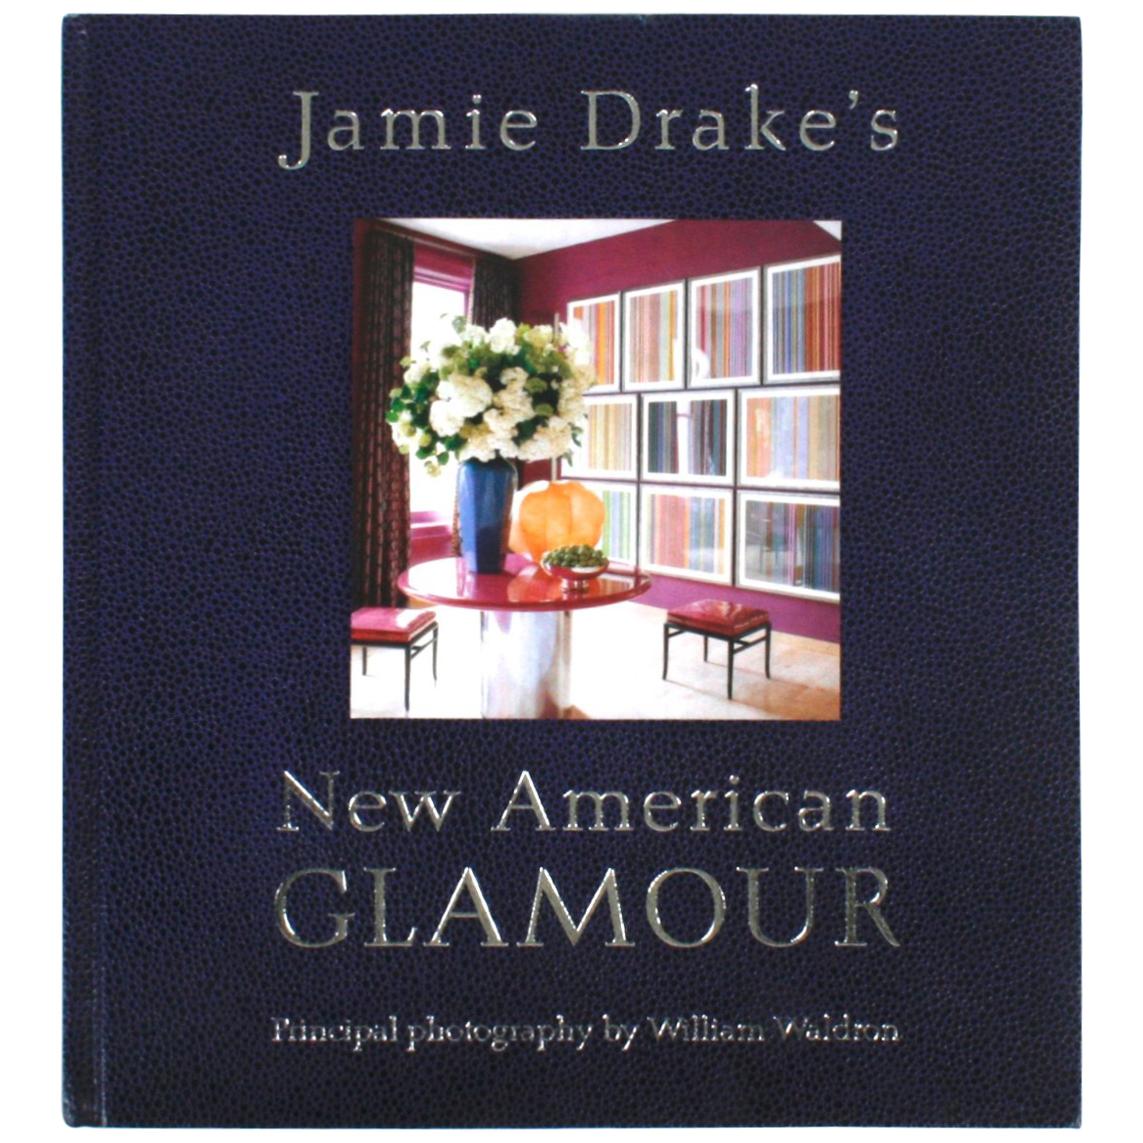 Jamie Drake's New American Glamour, First Edition For Sale